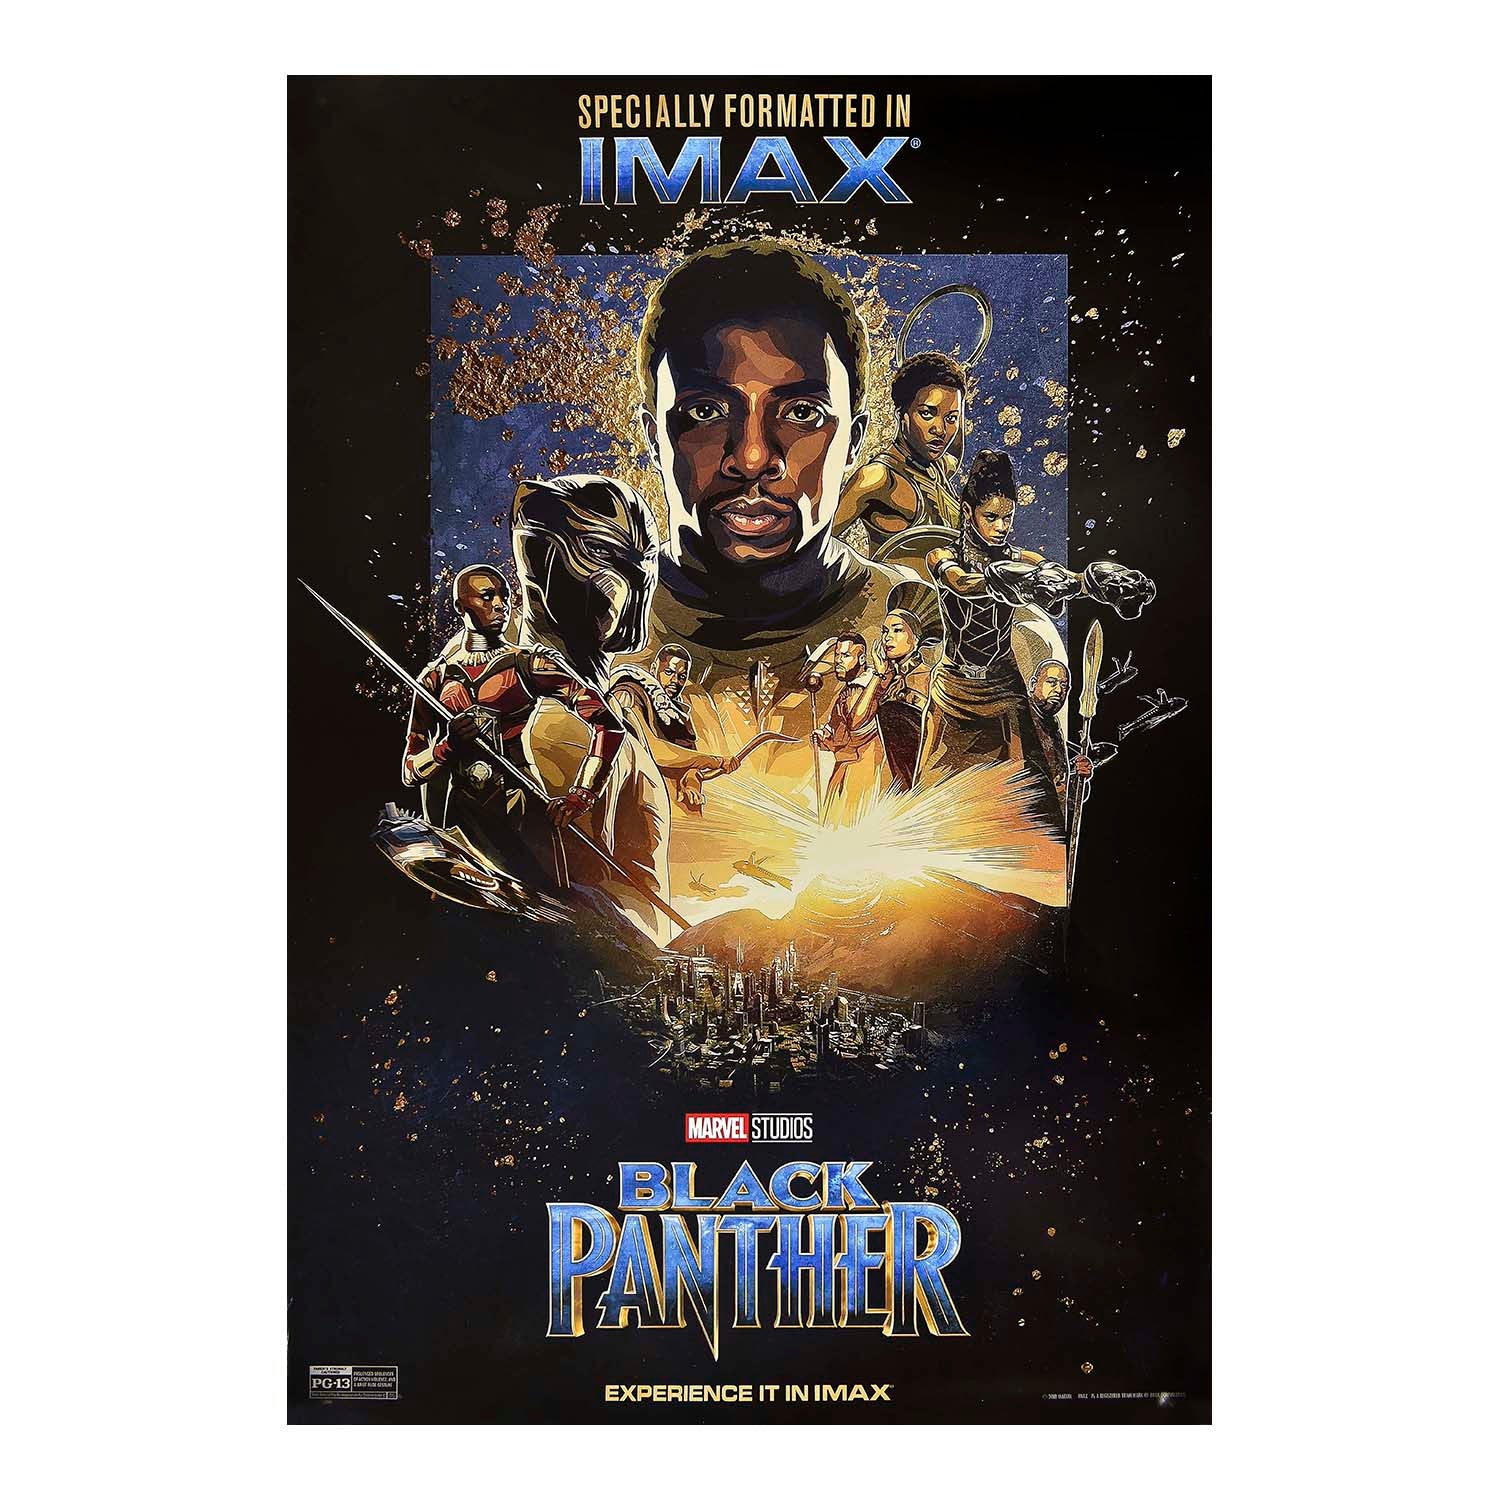 Original, small format, pre-release film poster, Black Panther, 2018, poster features T'Challa / Black Panther surrounded by key characters from his Wakanda kingdom, including Killmonger, Shuri and Okoye. 